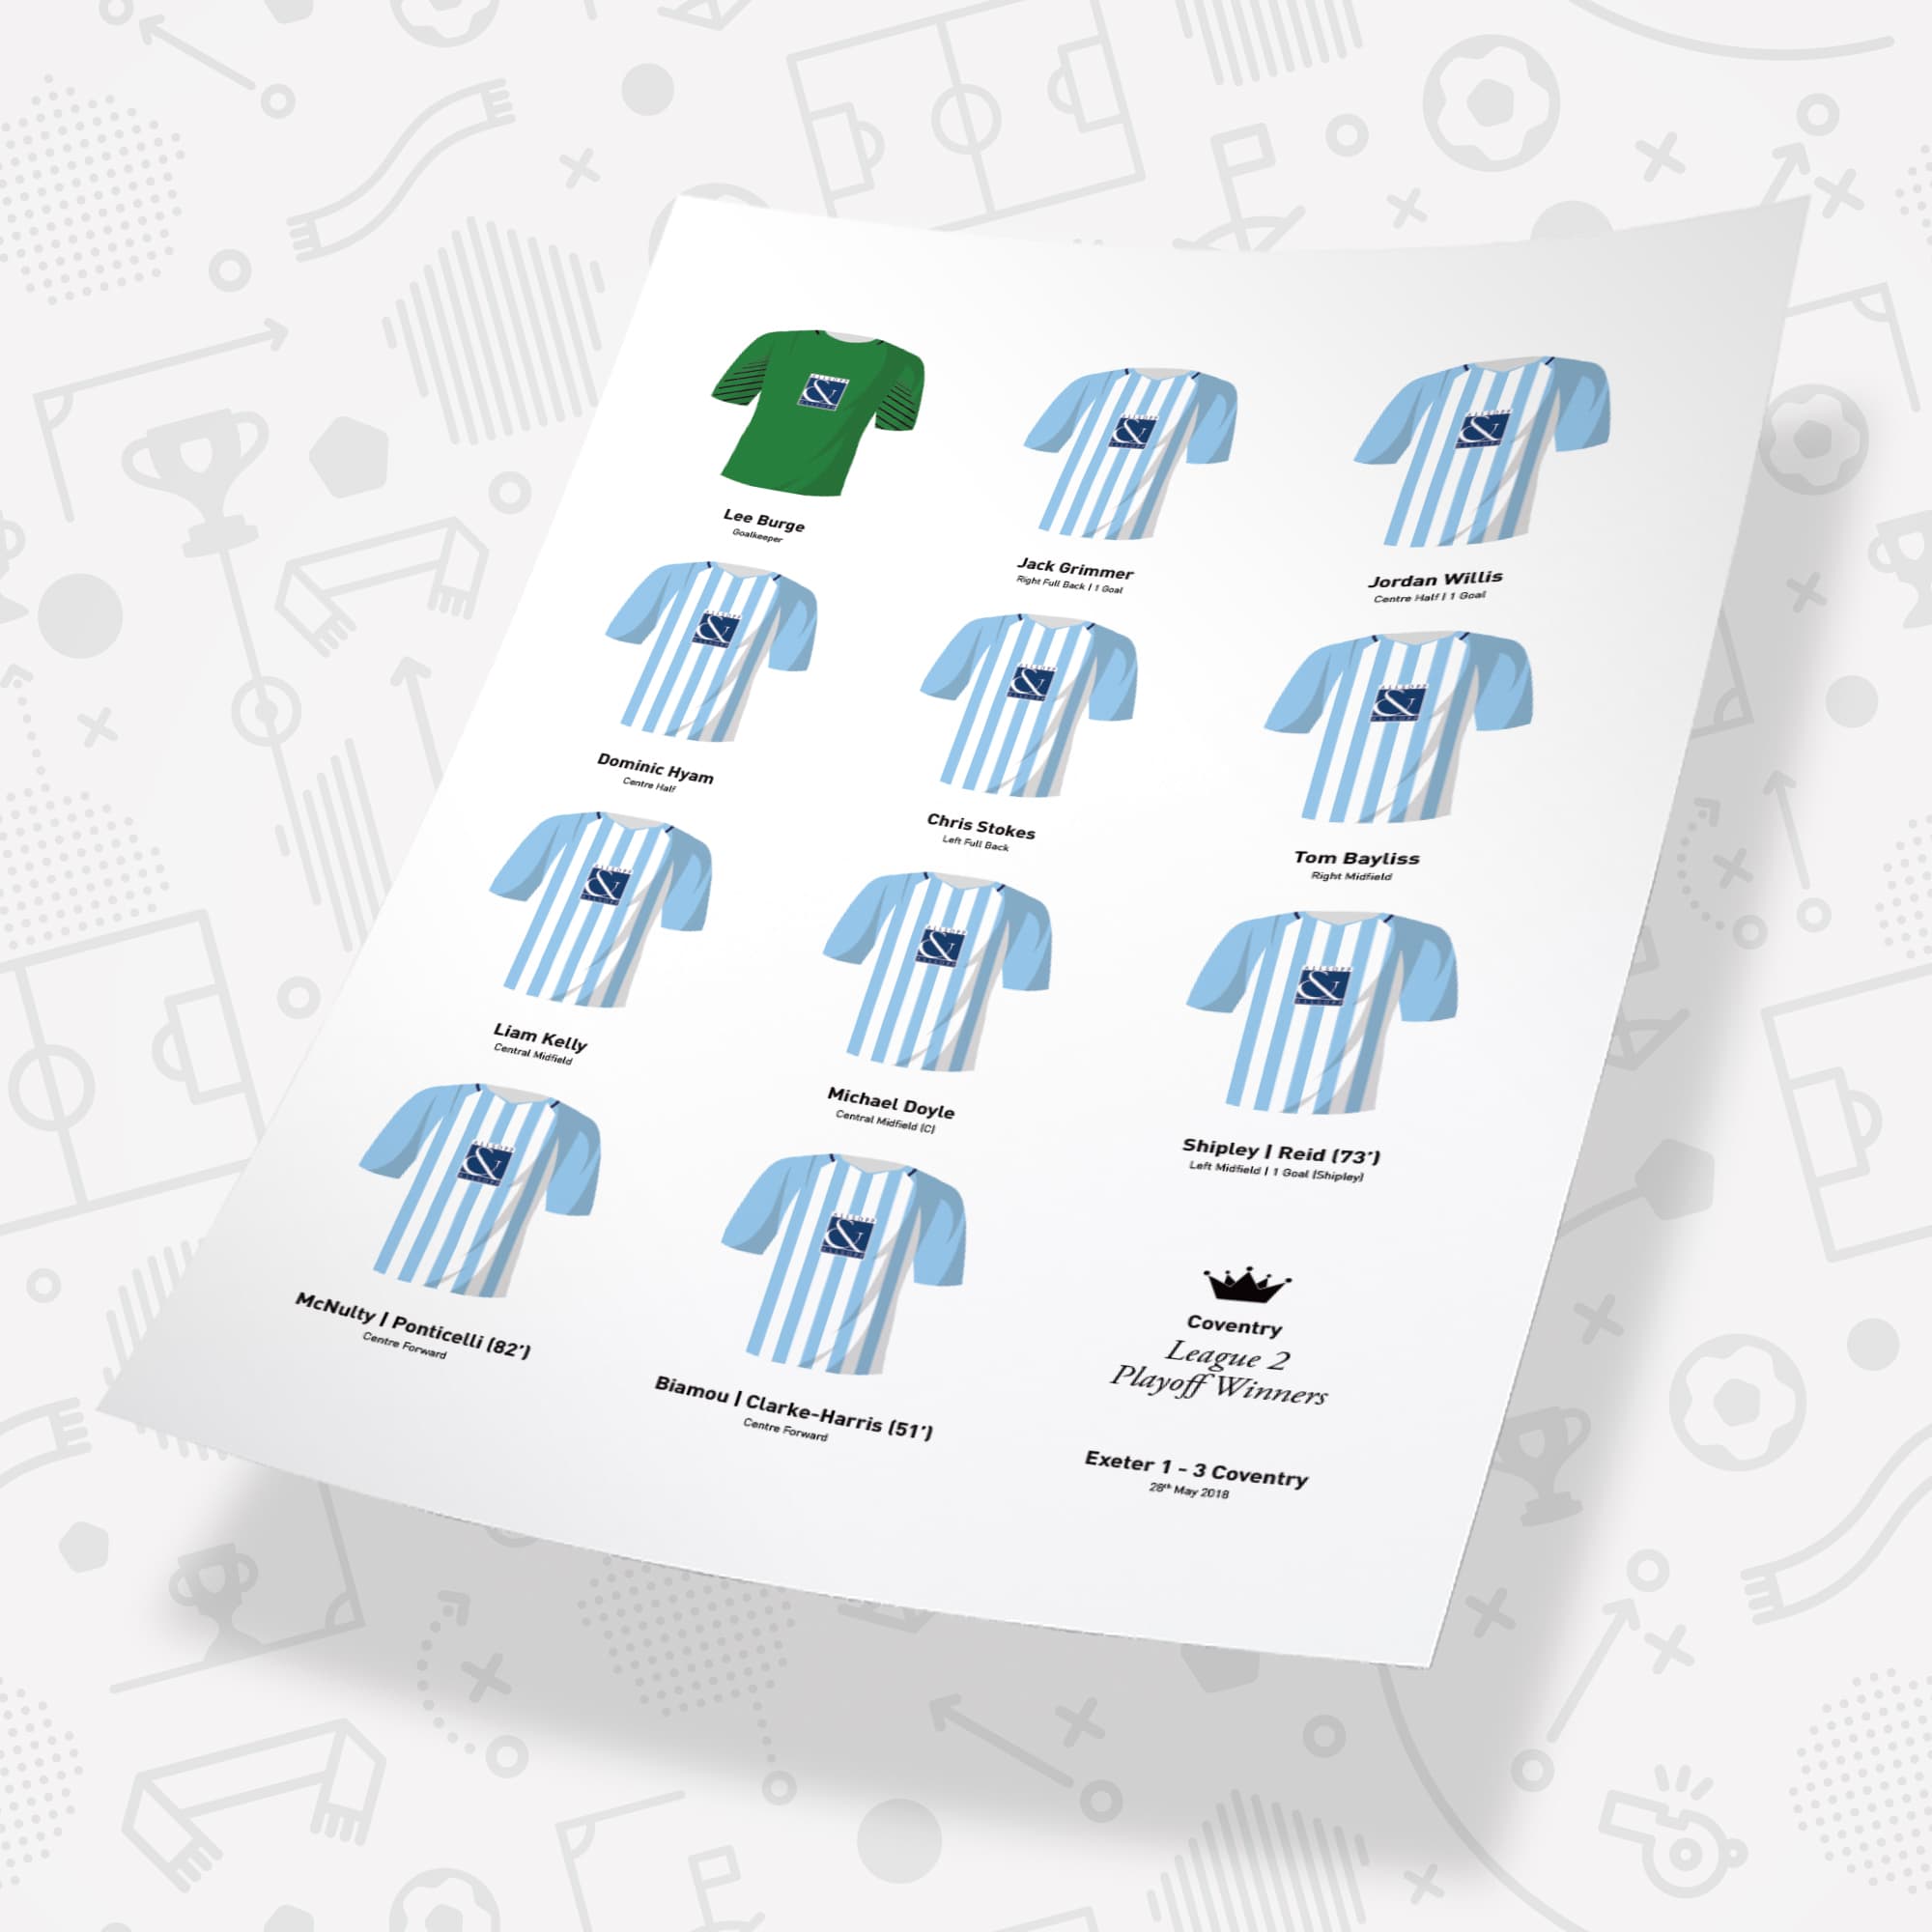 Coventry 2018 League 2 Playoff Winners Football Team Print Good Team On Paper